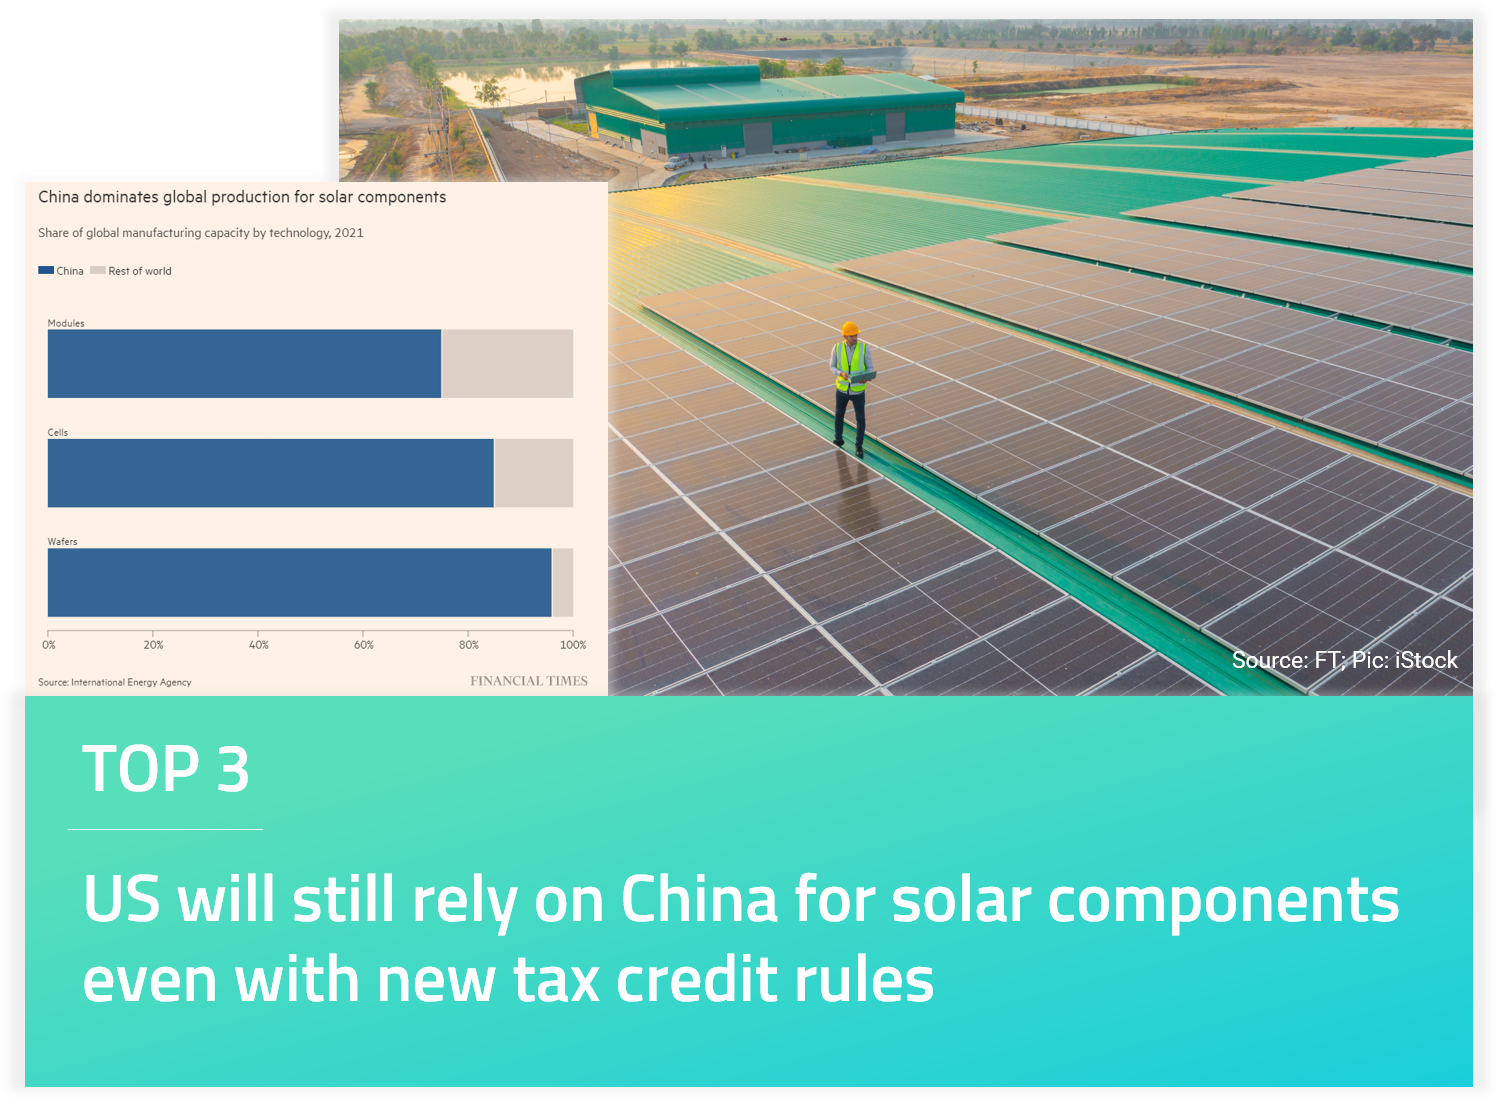 US will still rely on China for solar components even with new tax credit rules